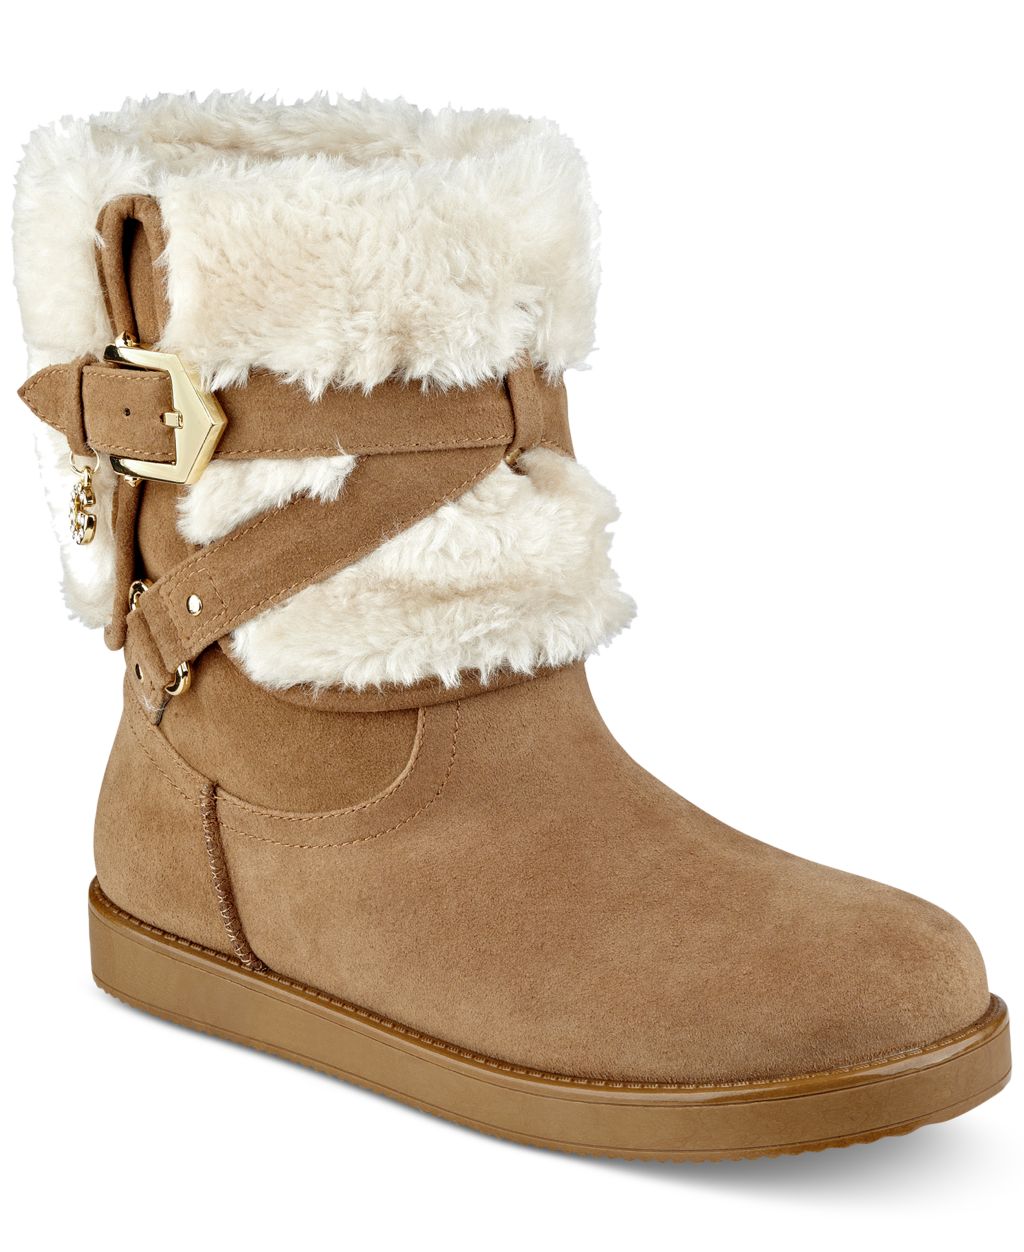 G by GUESS Fabric Upper Alixa Cold-Weather Booties